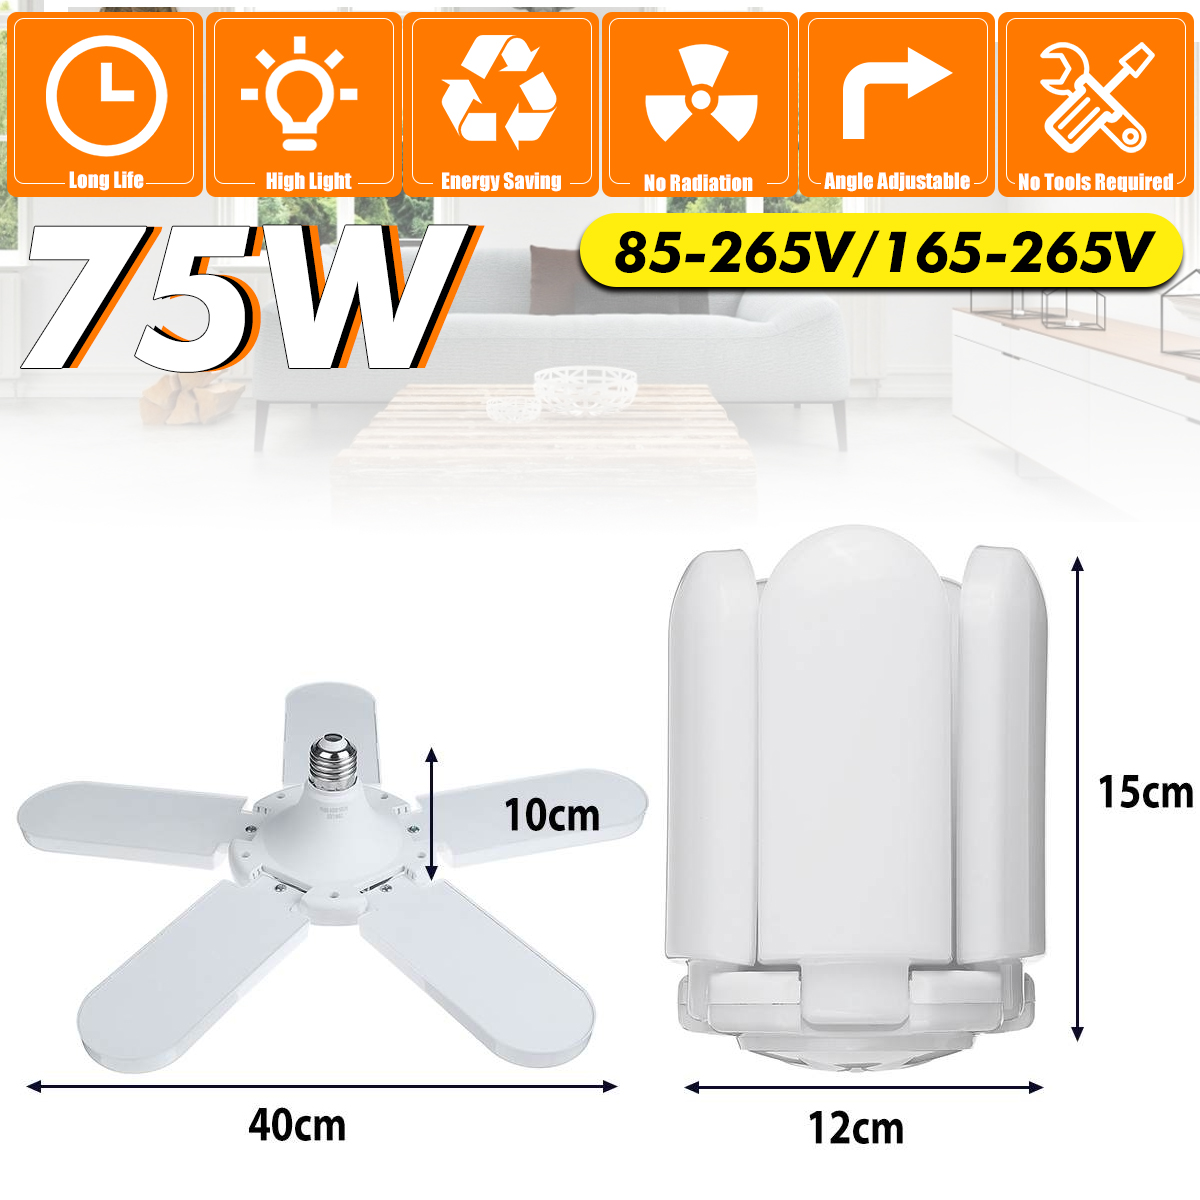 75W-E27-2500LM-Deformable-LED-Ceiling-Lamp-Light-Fixture-Foldable-Home-Garage-1710184-2